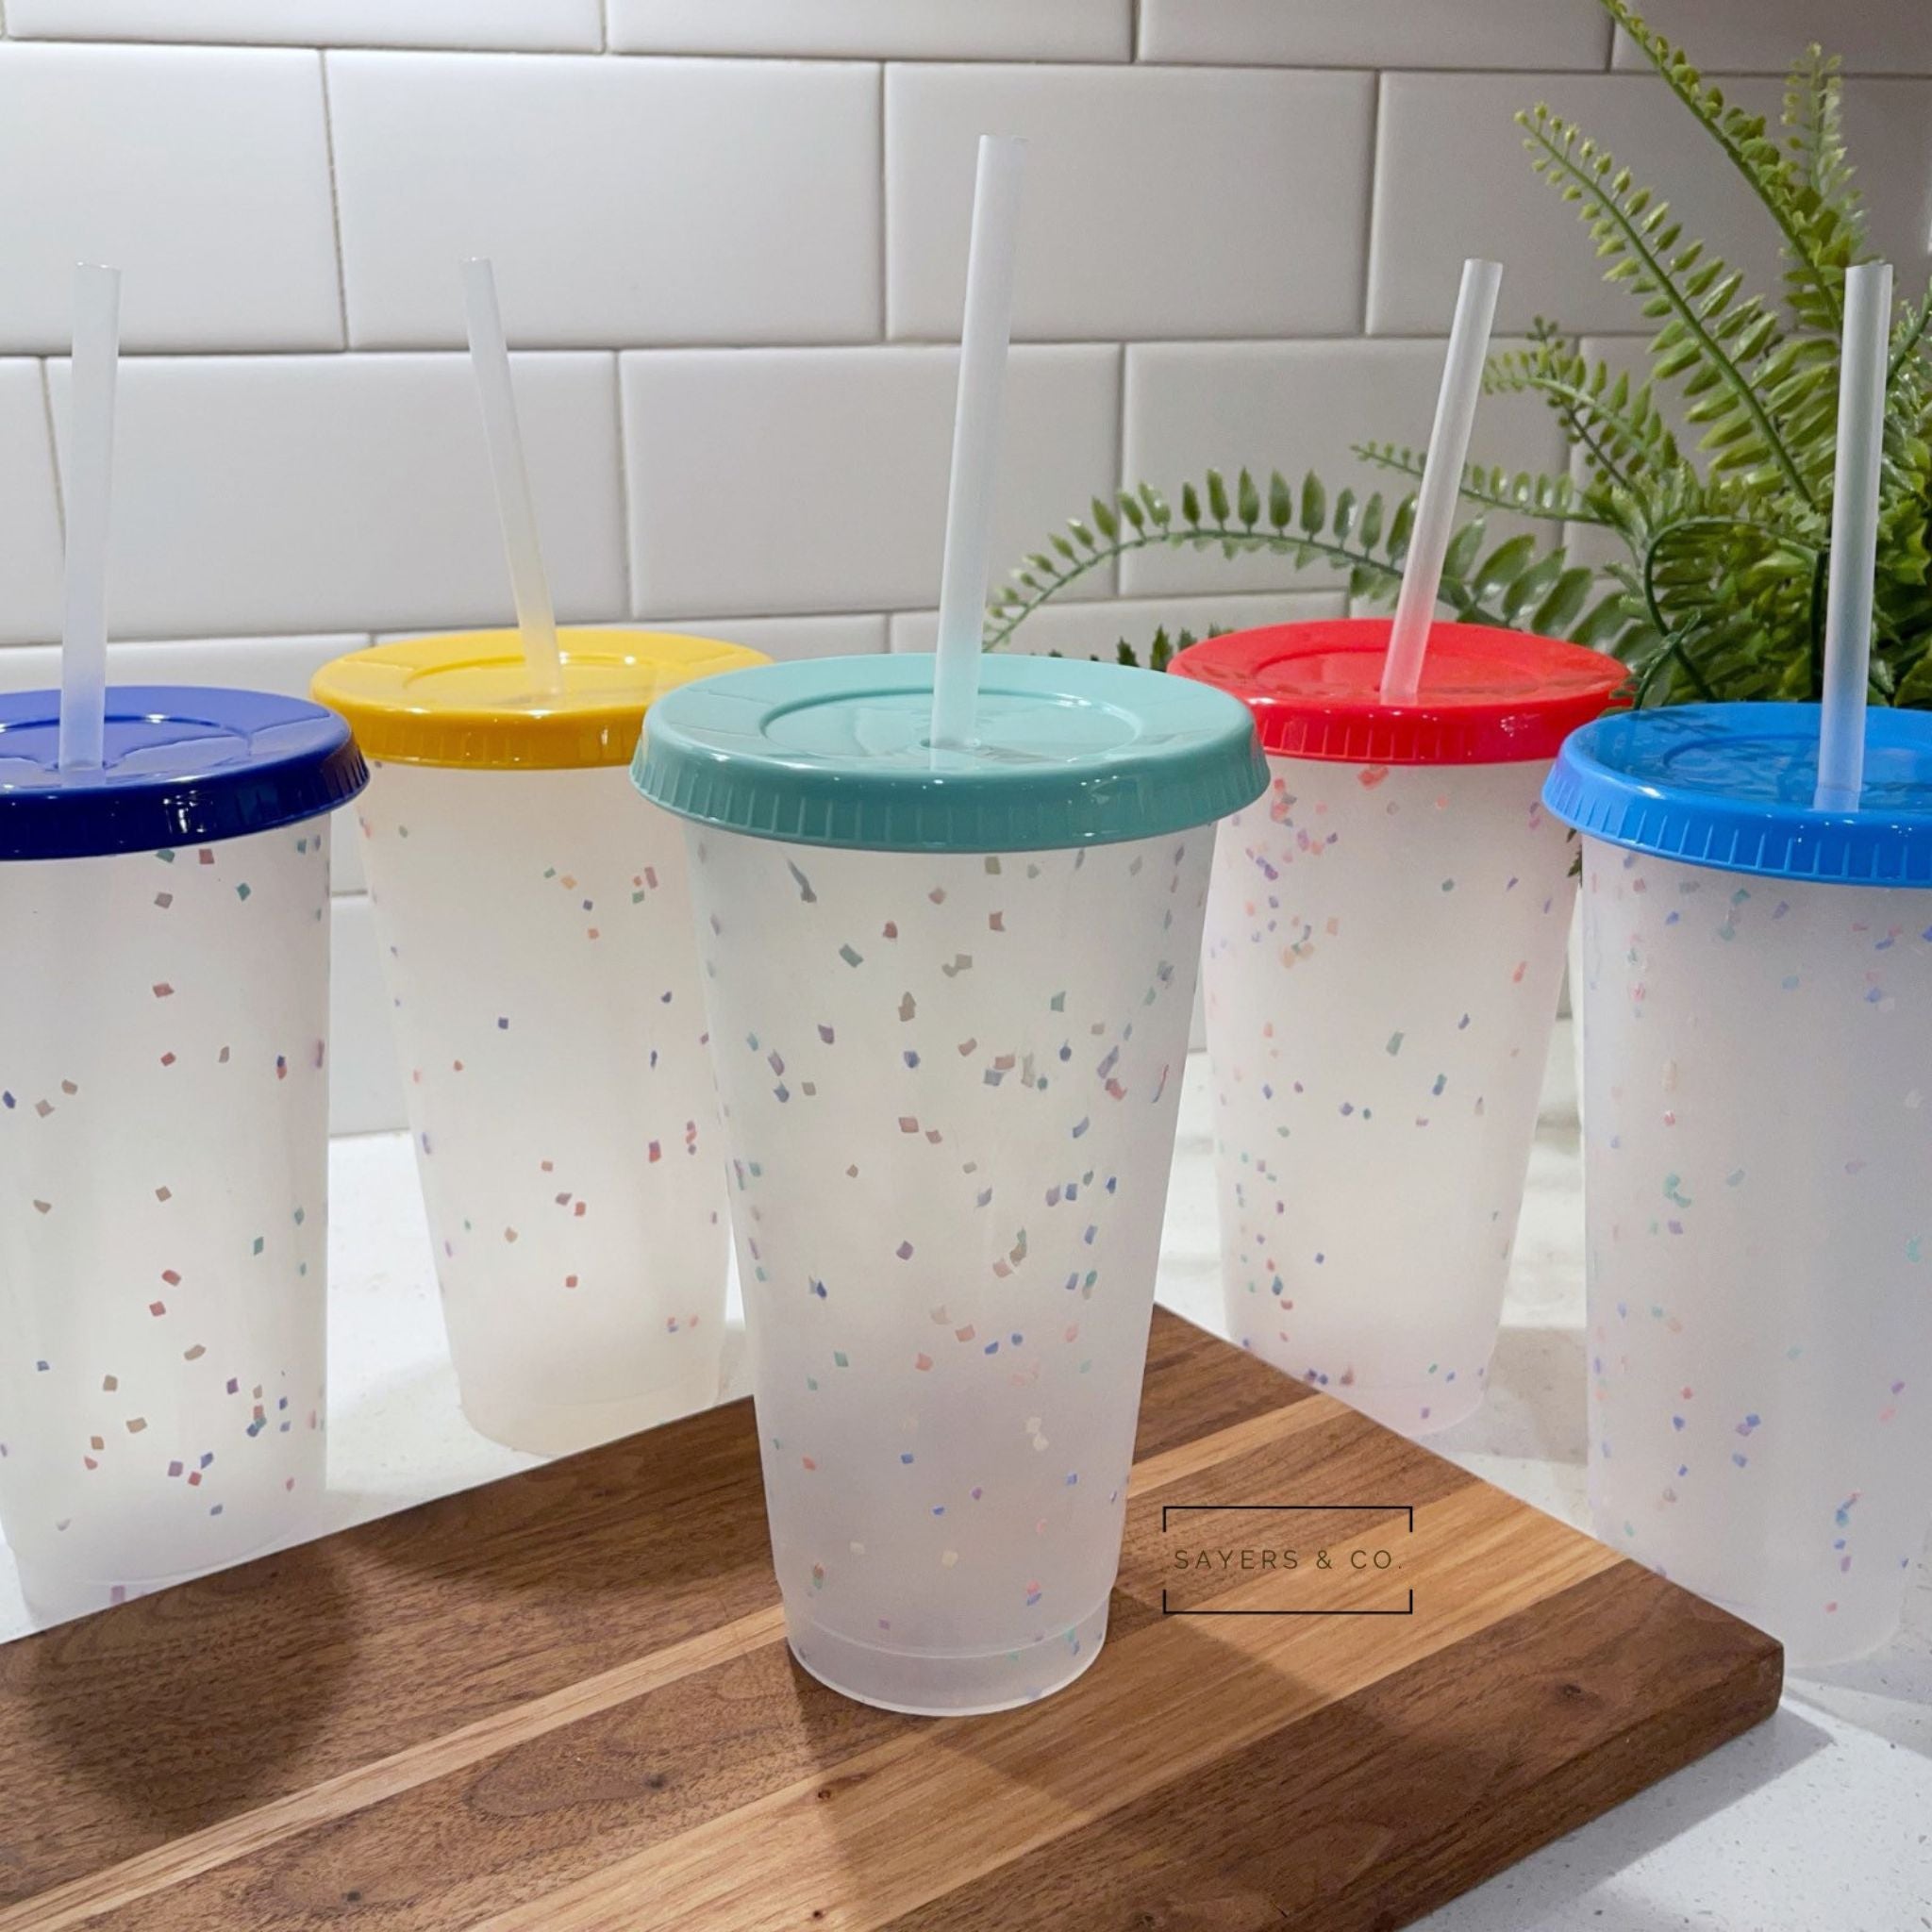 Cups with Lids and Straws for Adults - 5 Glitter Reusable Cups with Lids and Straws in Vivid Colors, 24 oz Iced Coffee & Bulk Party Tumblers, Plastic